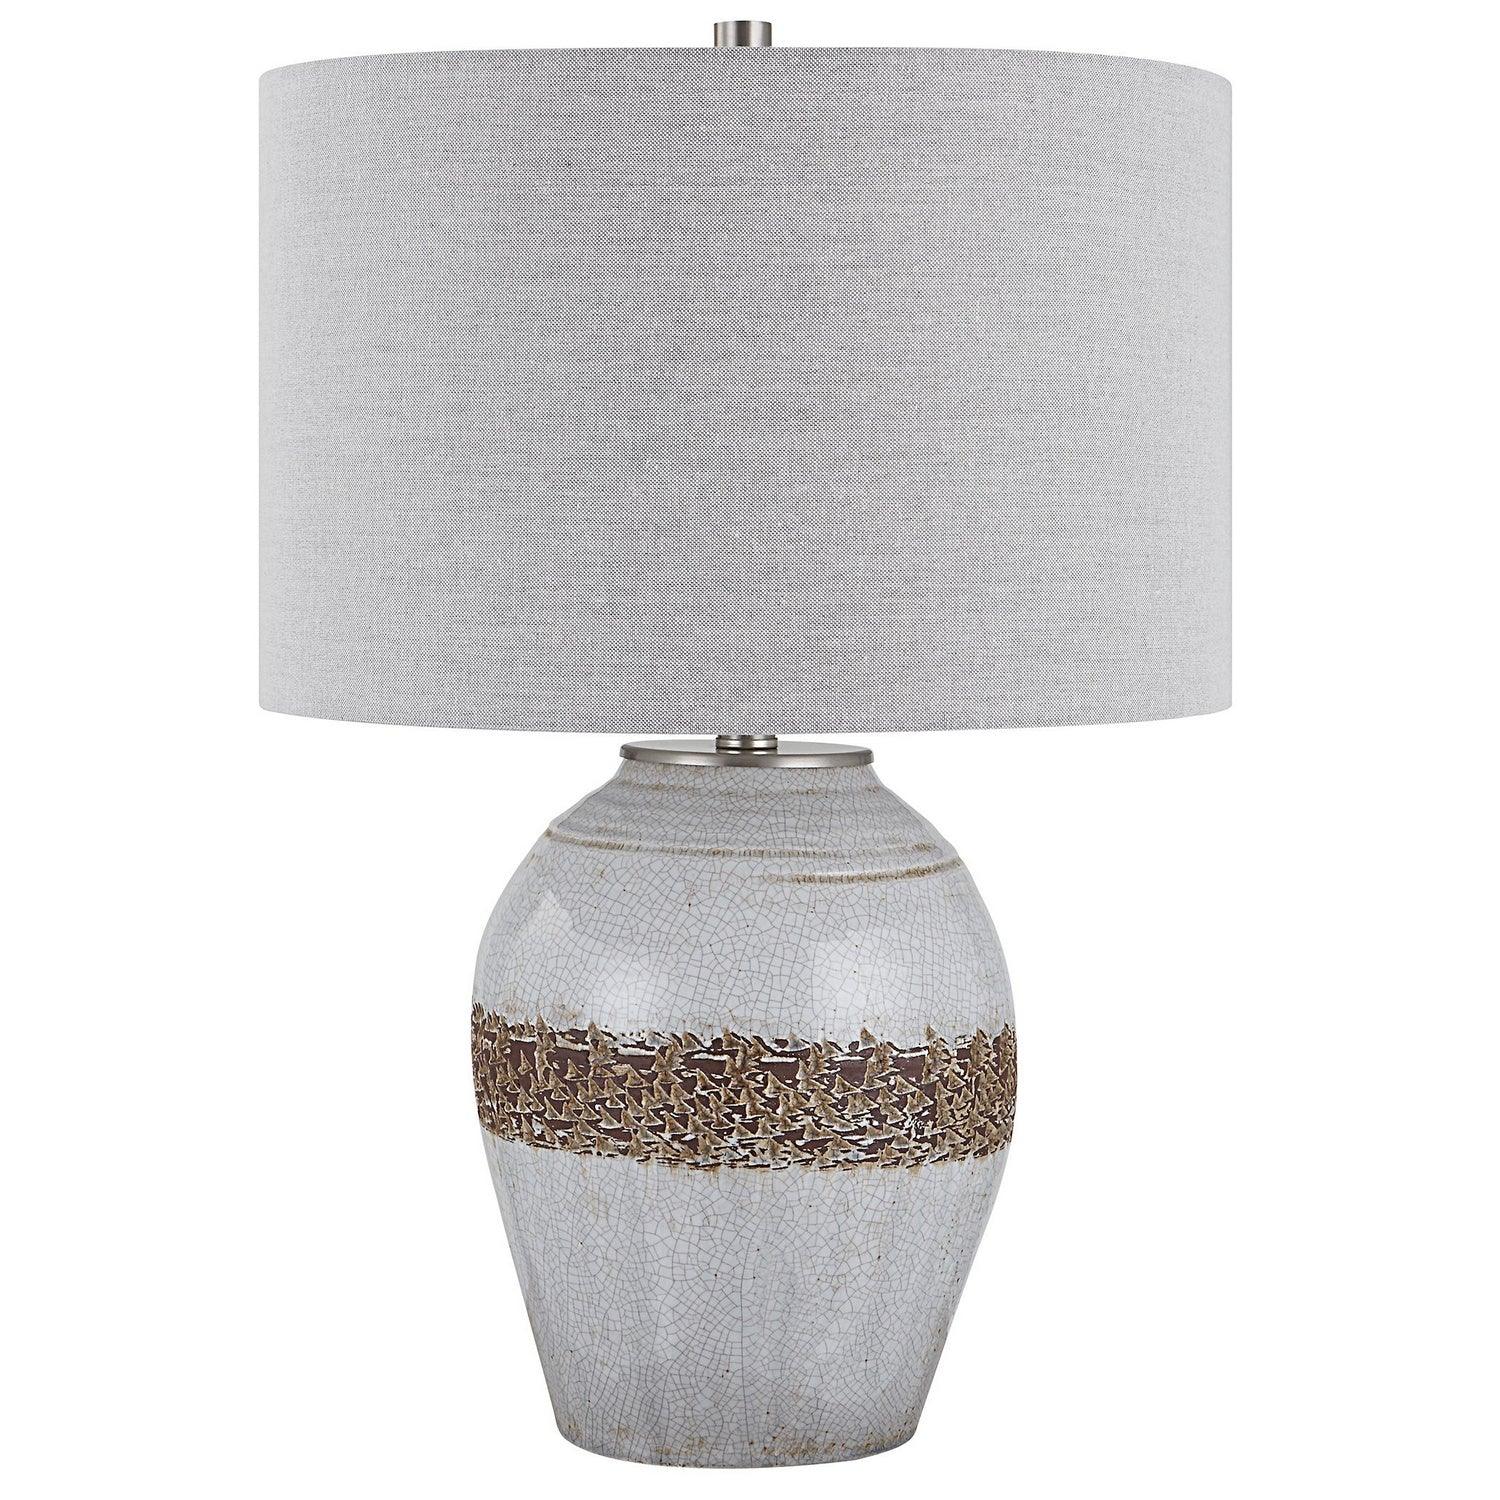 The Uttermost - Poul Table Lamp - 30053-1 | Montreal Lighting & Hardware